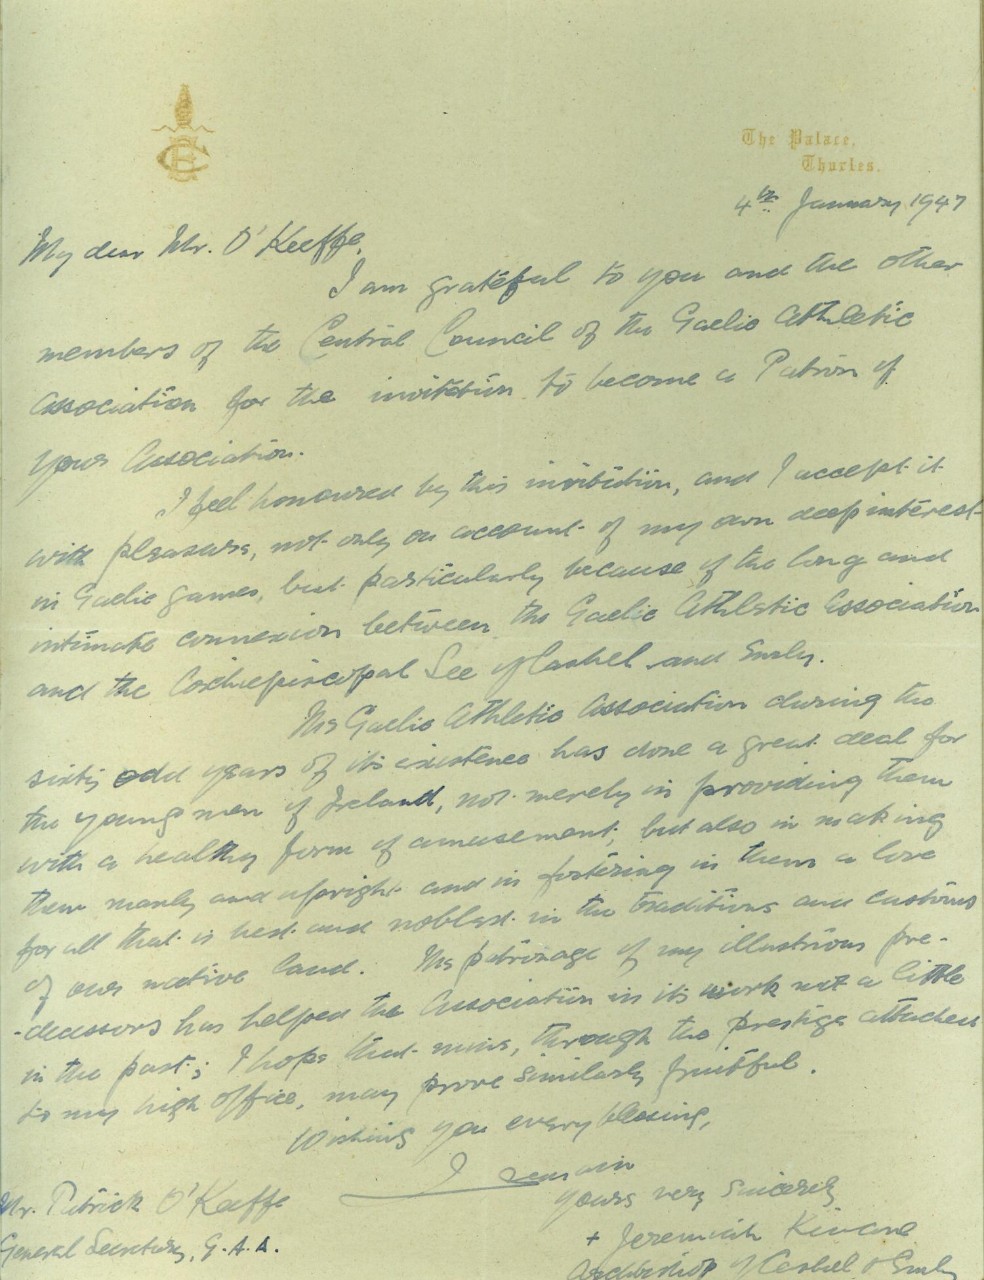 A letter from Archbishop Kinane, dated 4th January 1947, accepting the GAA's invitation to become a patron of the Association. Kinane recalls the long-standing connection between the Archbishops of Cashel and Emly and the GAA.